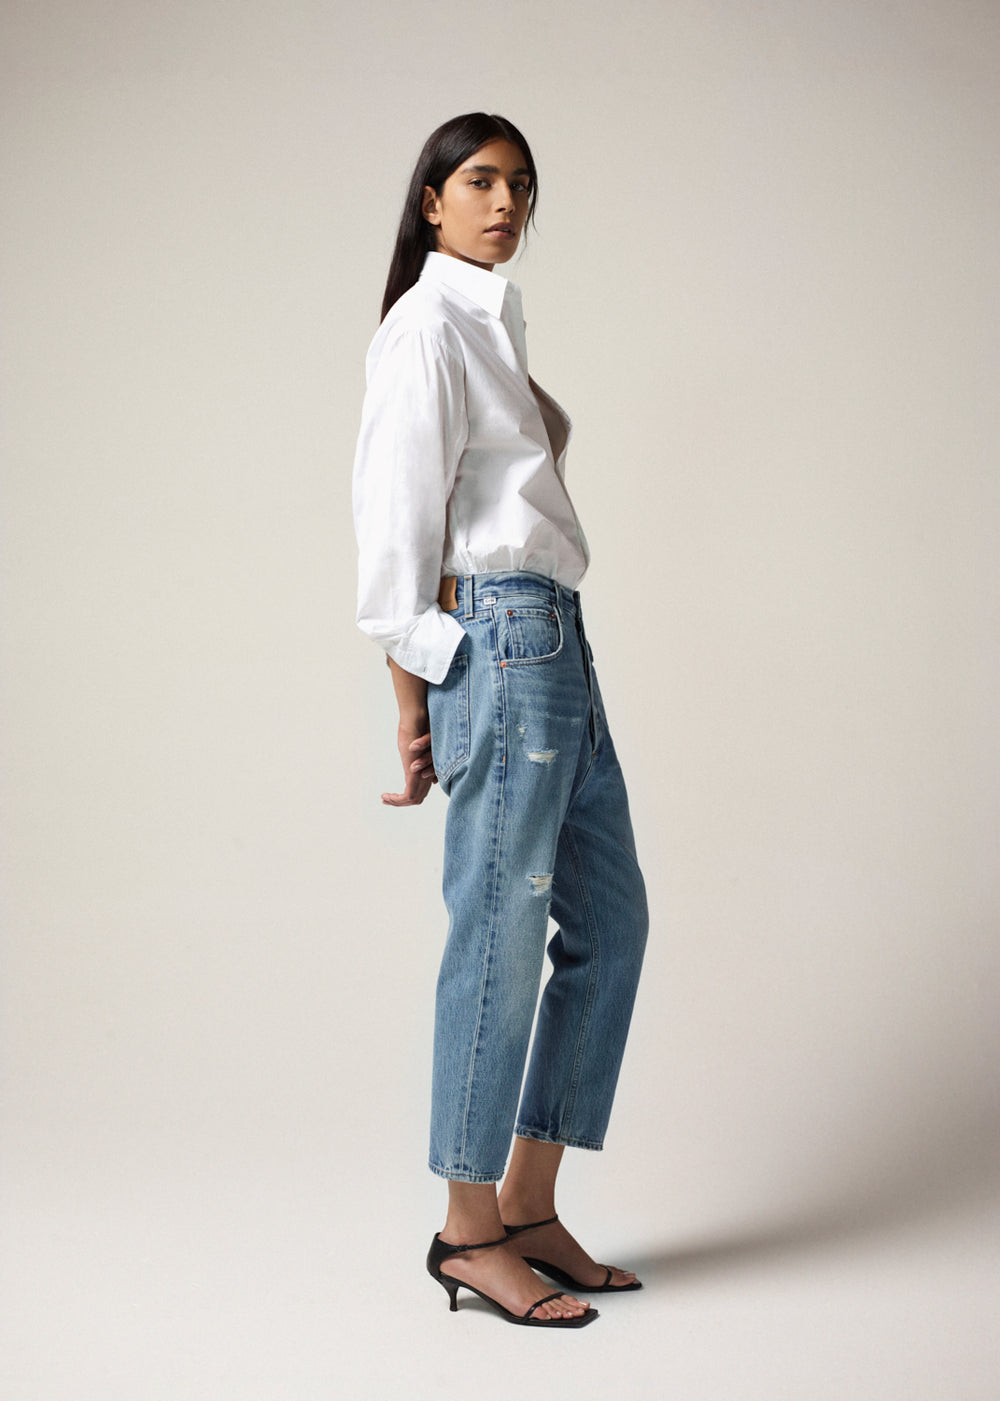 Women's Denim Guide 2.0 – Citizens of Humanity